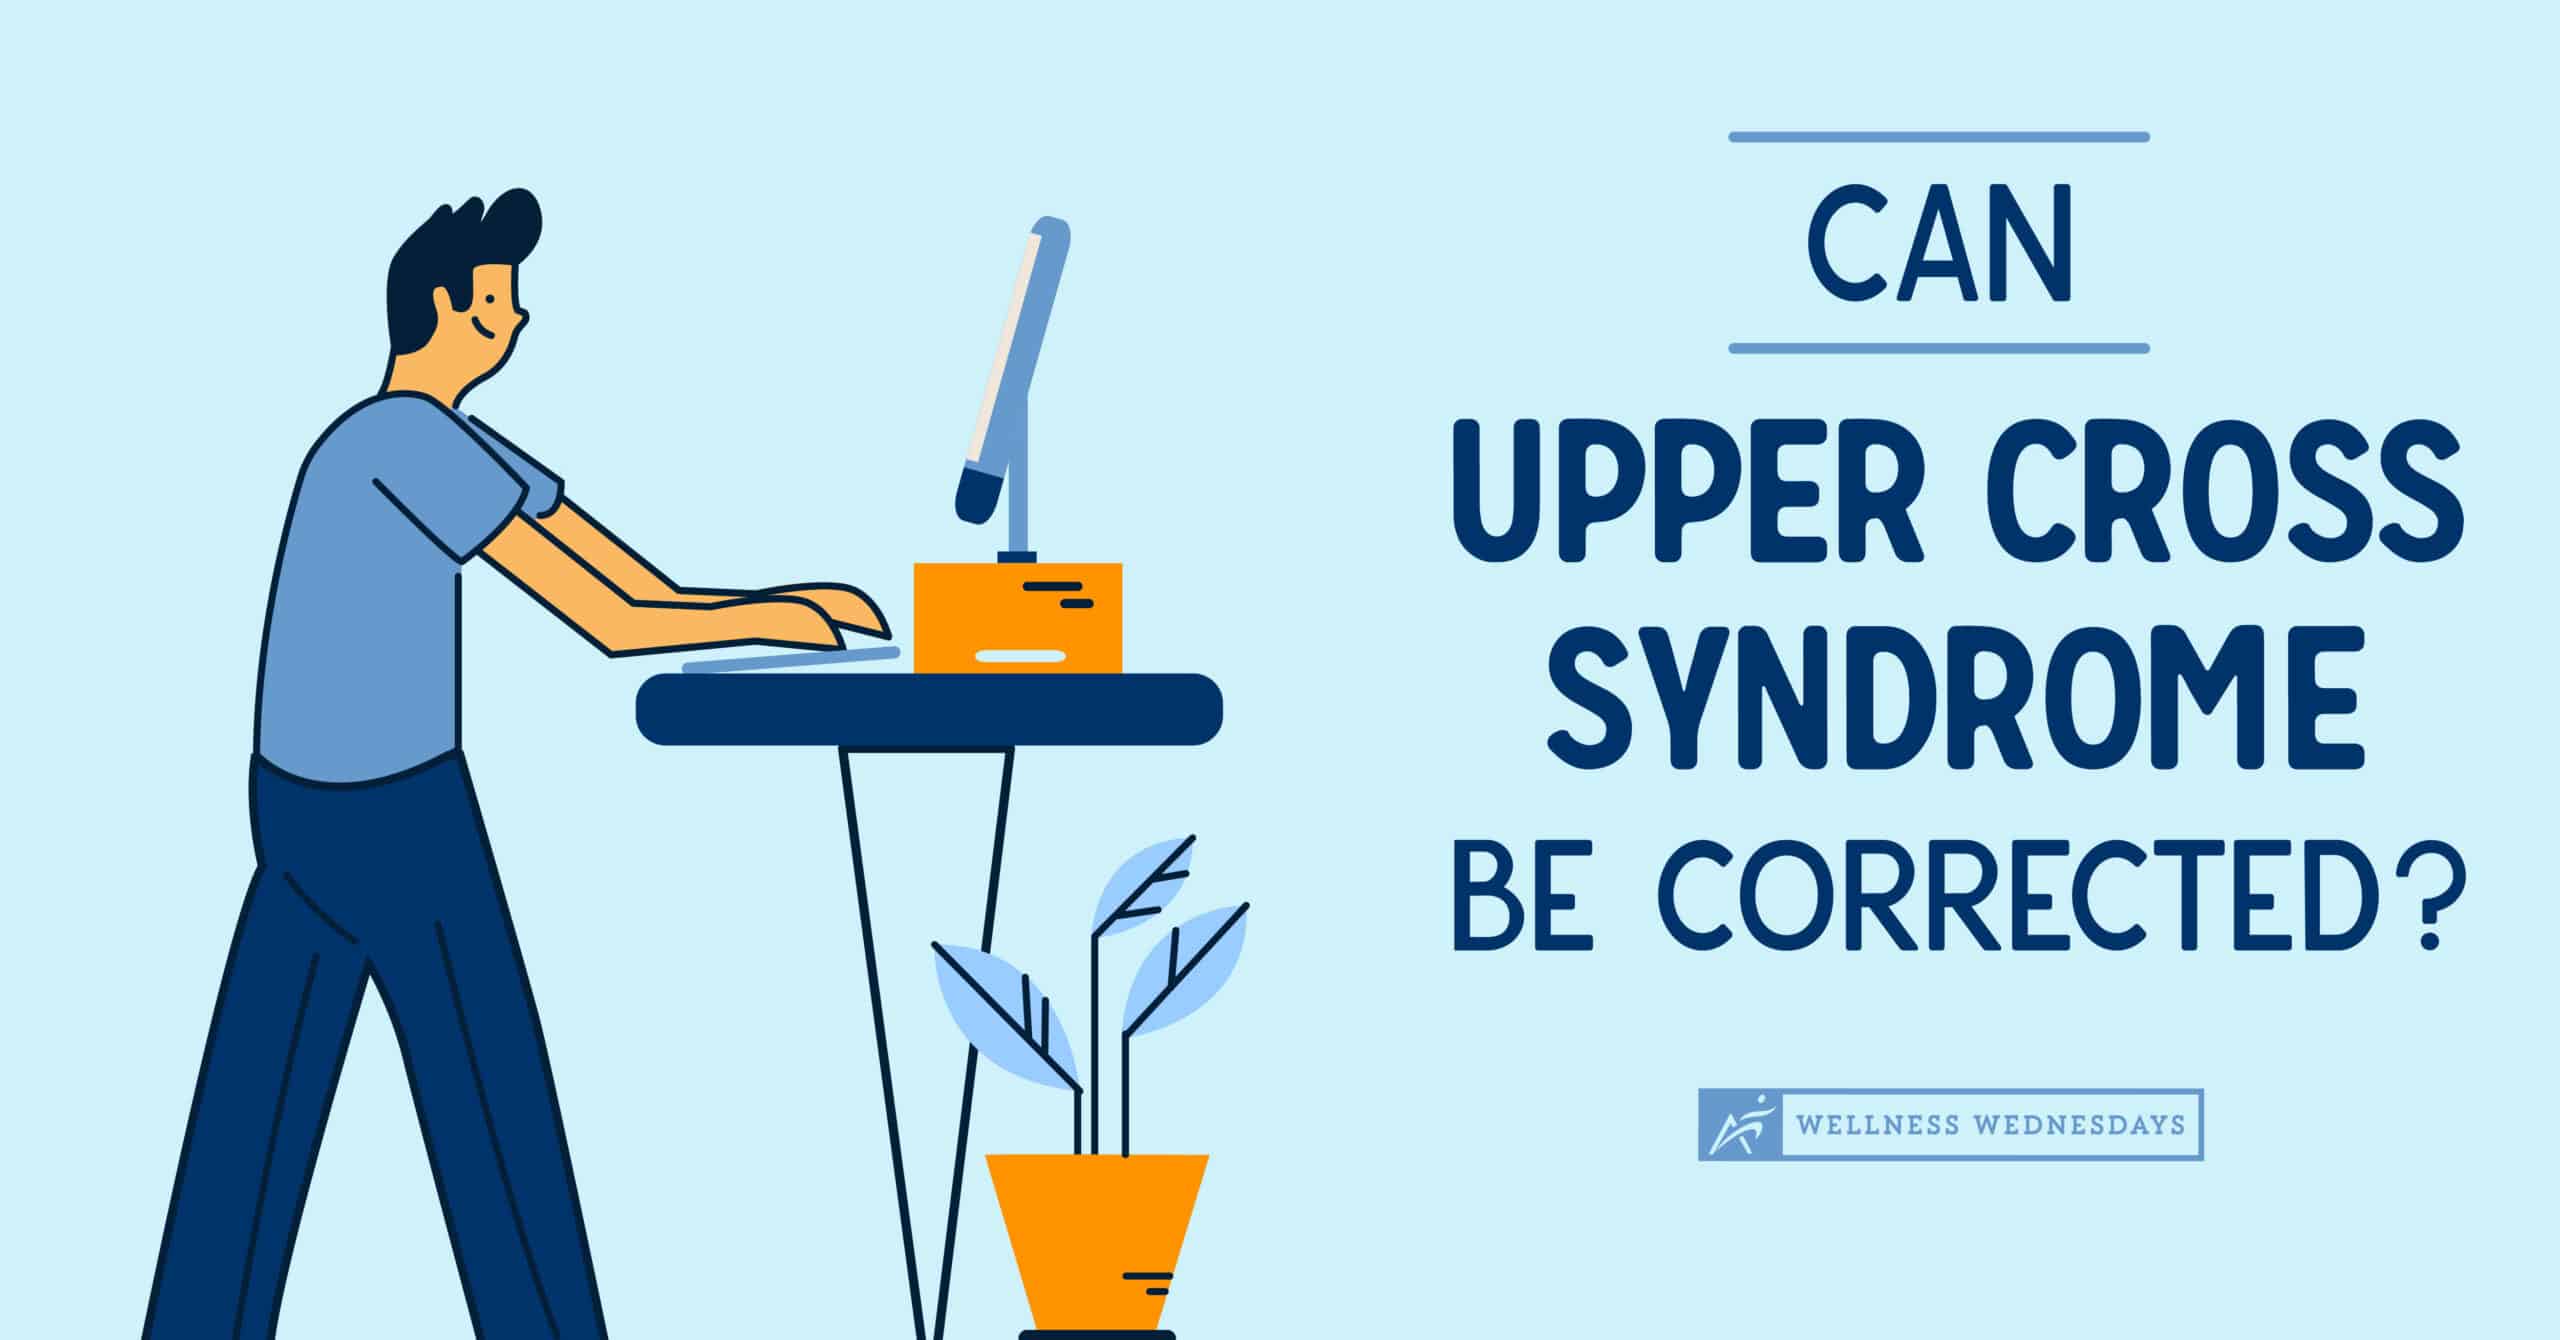 Can Upper Cross Syndrome Be Corrected?